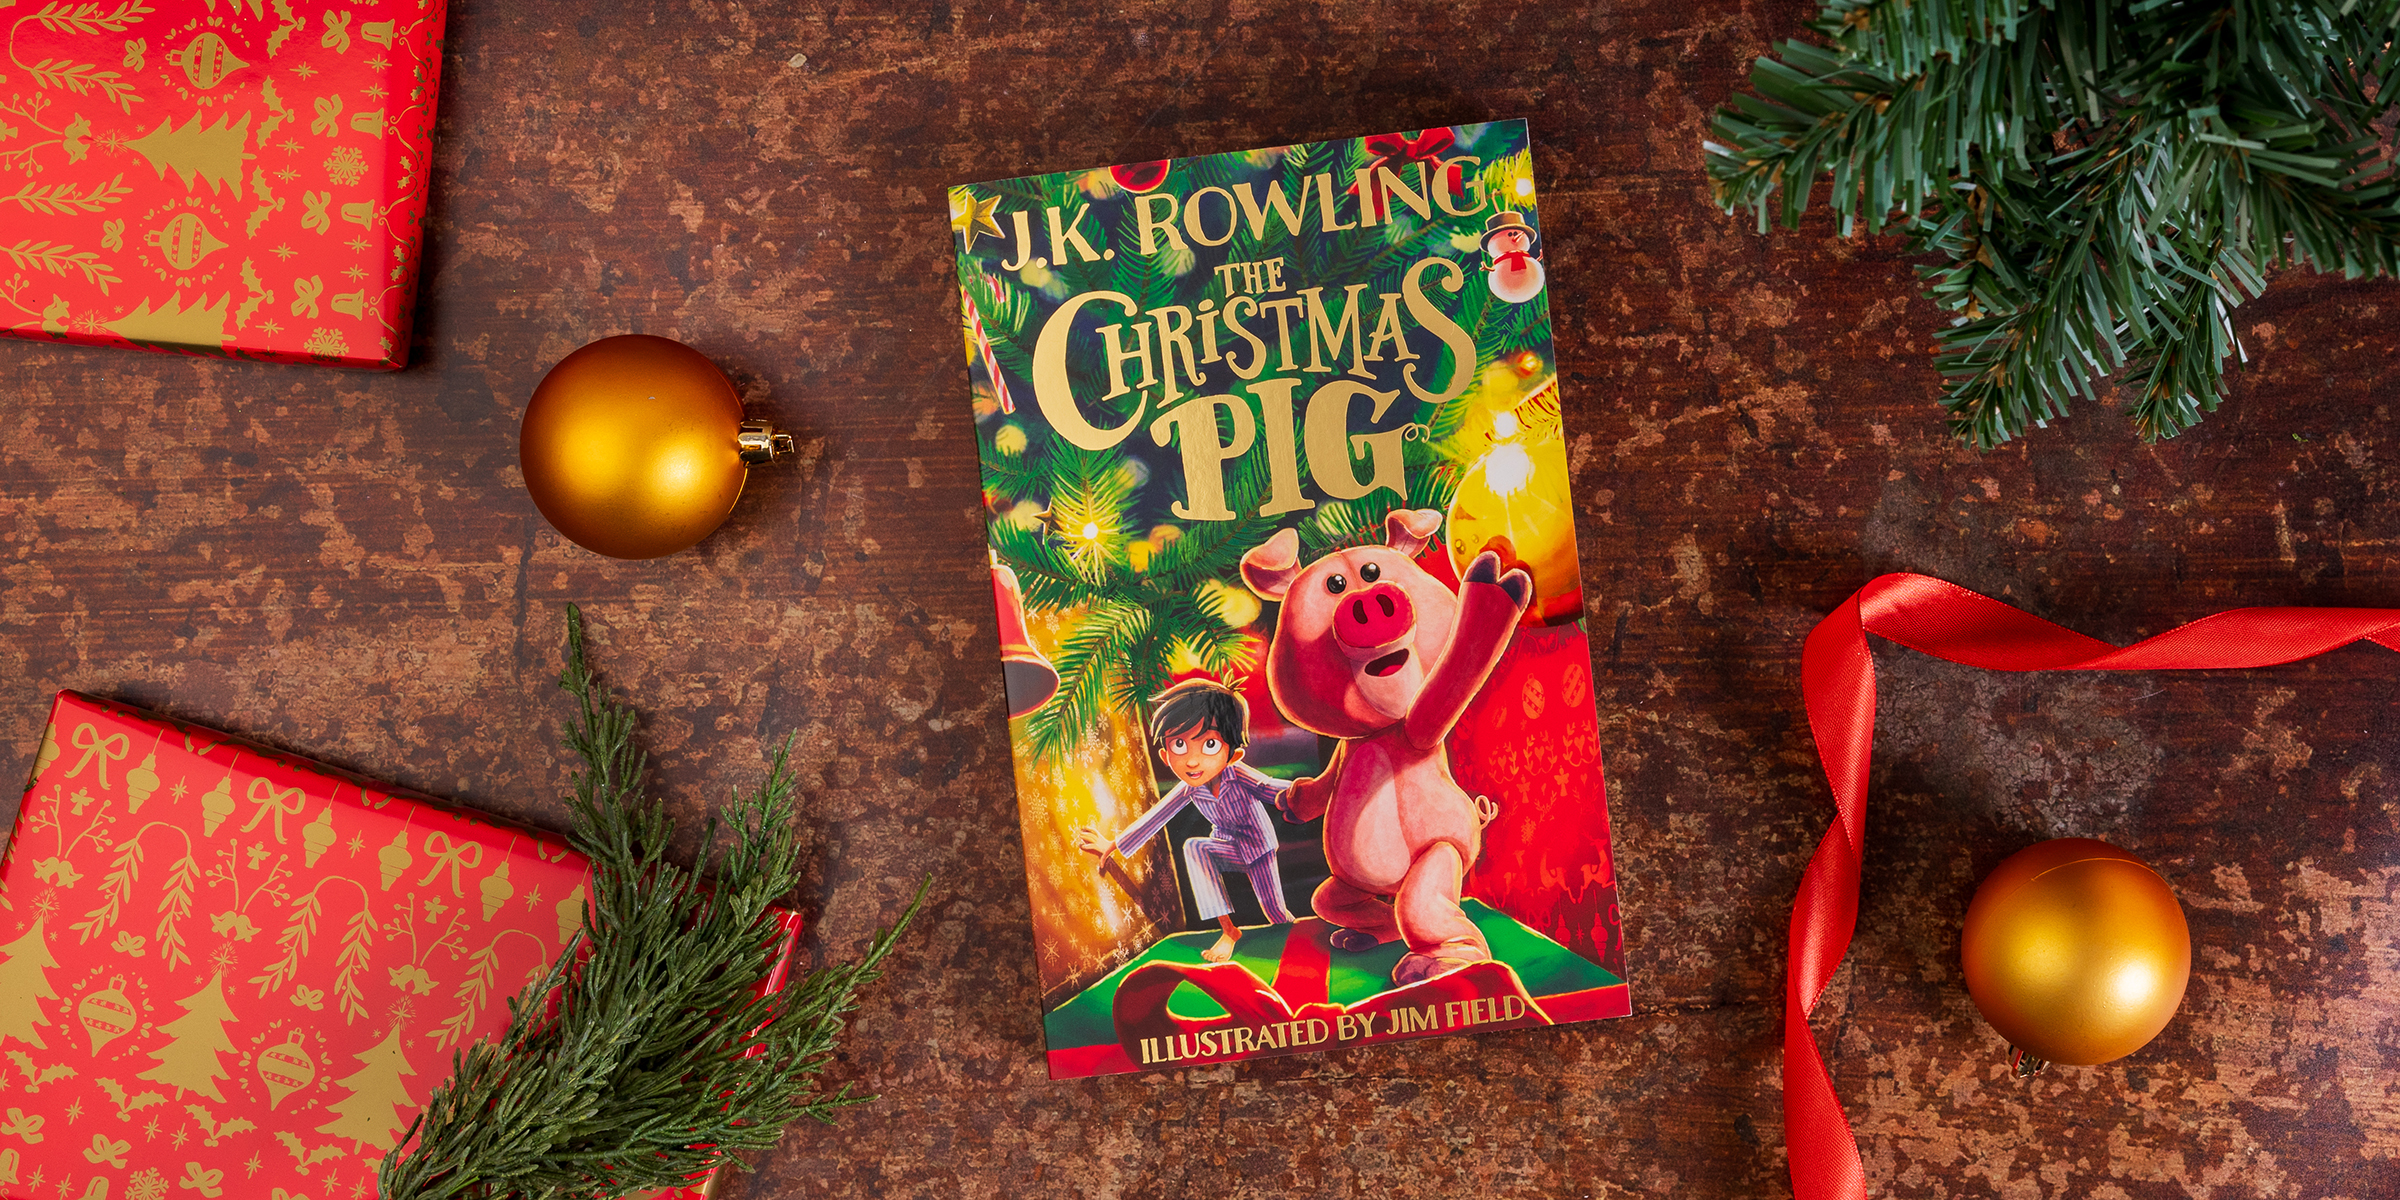 The Christmas Pig paperback now available!